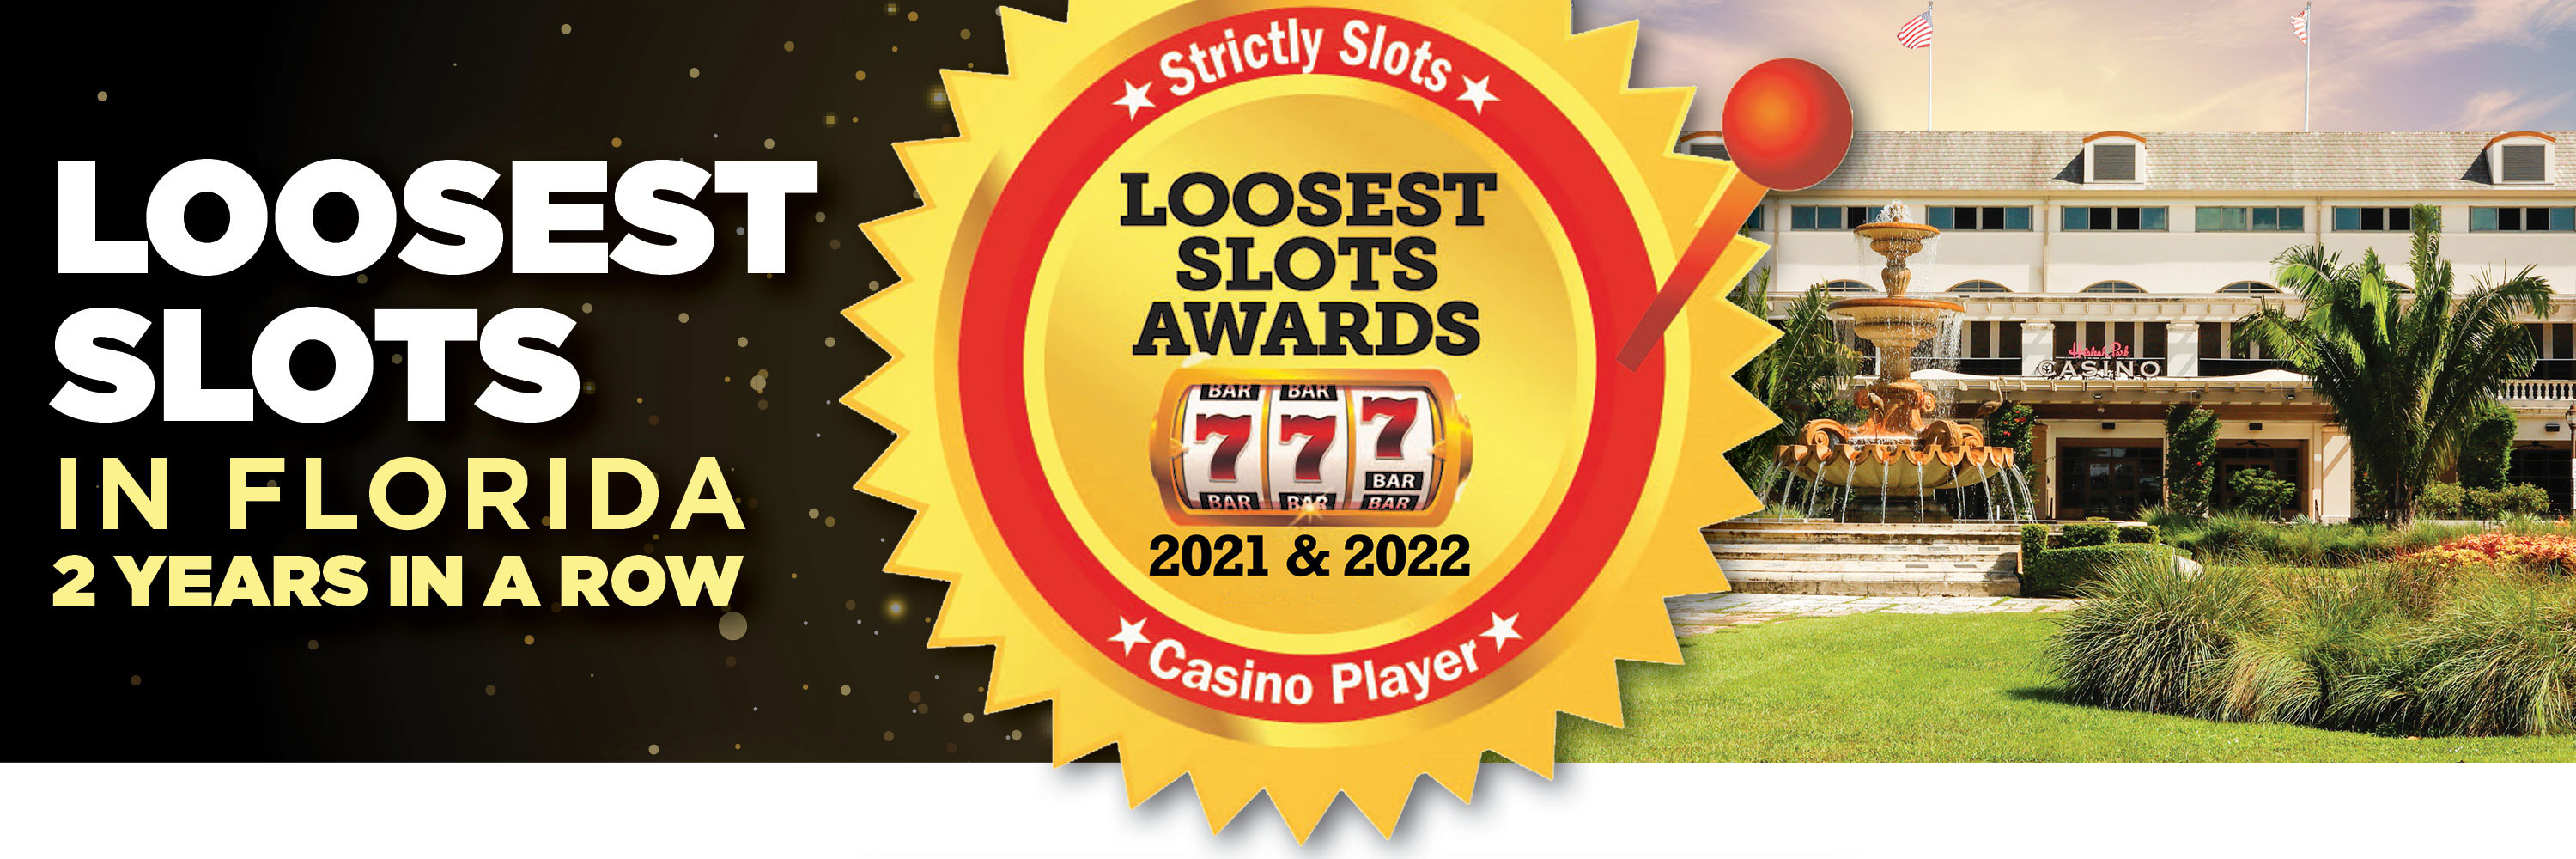 Looset Slots in Florida - 2 Years in a Row